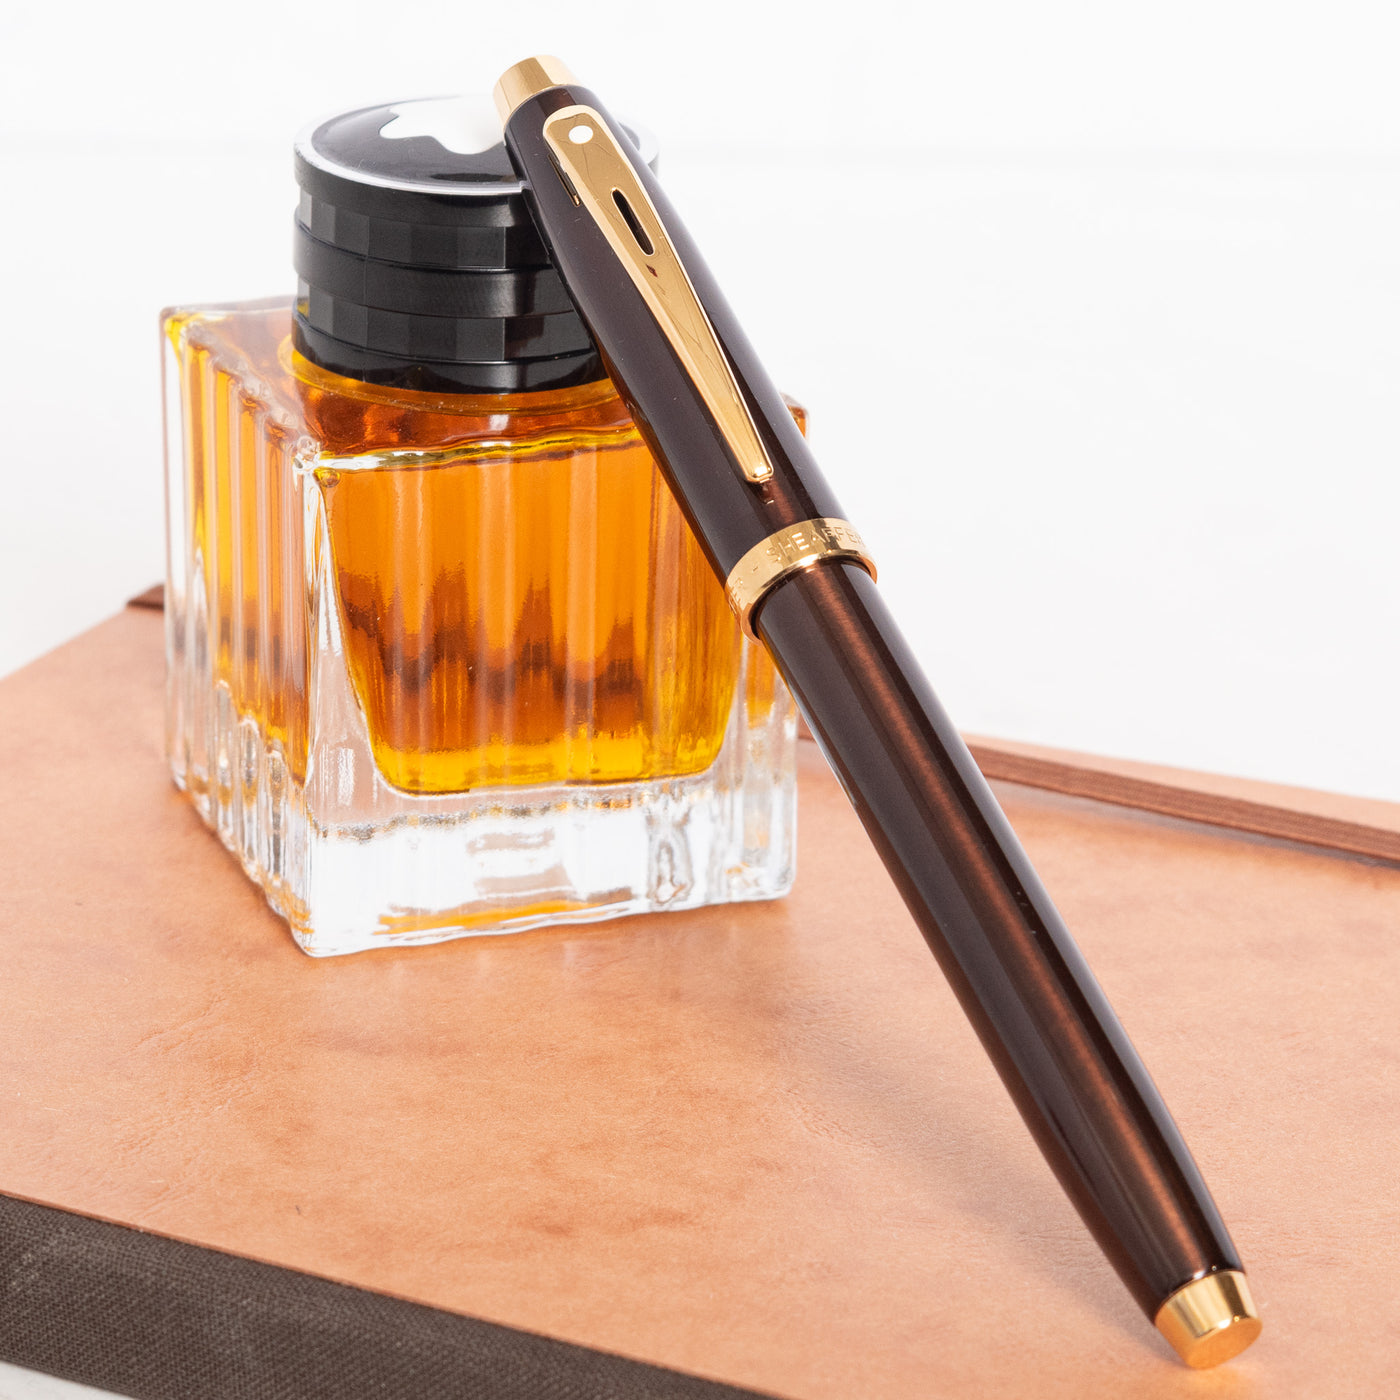 Sheaffer 100 Fountain Pen - Coffee Brown with PVD Gold Trim capped